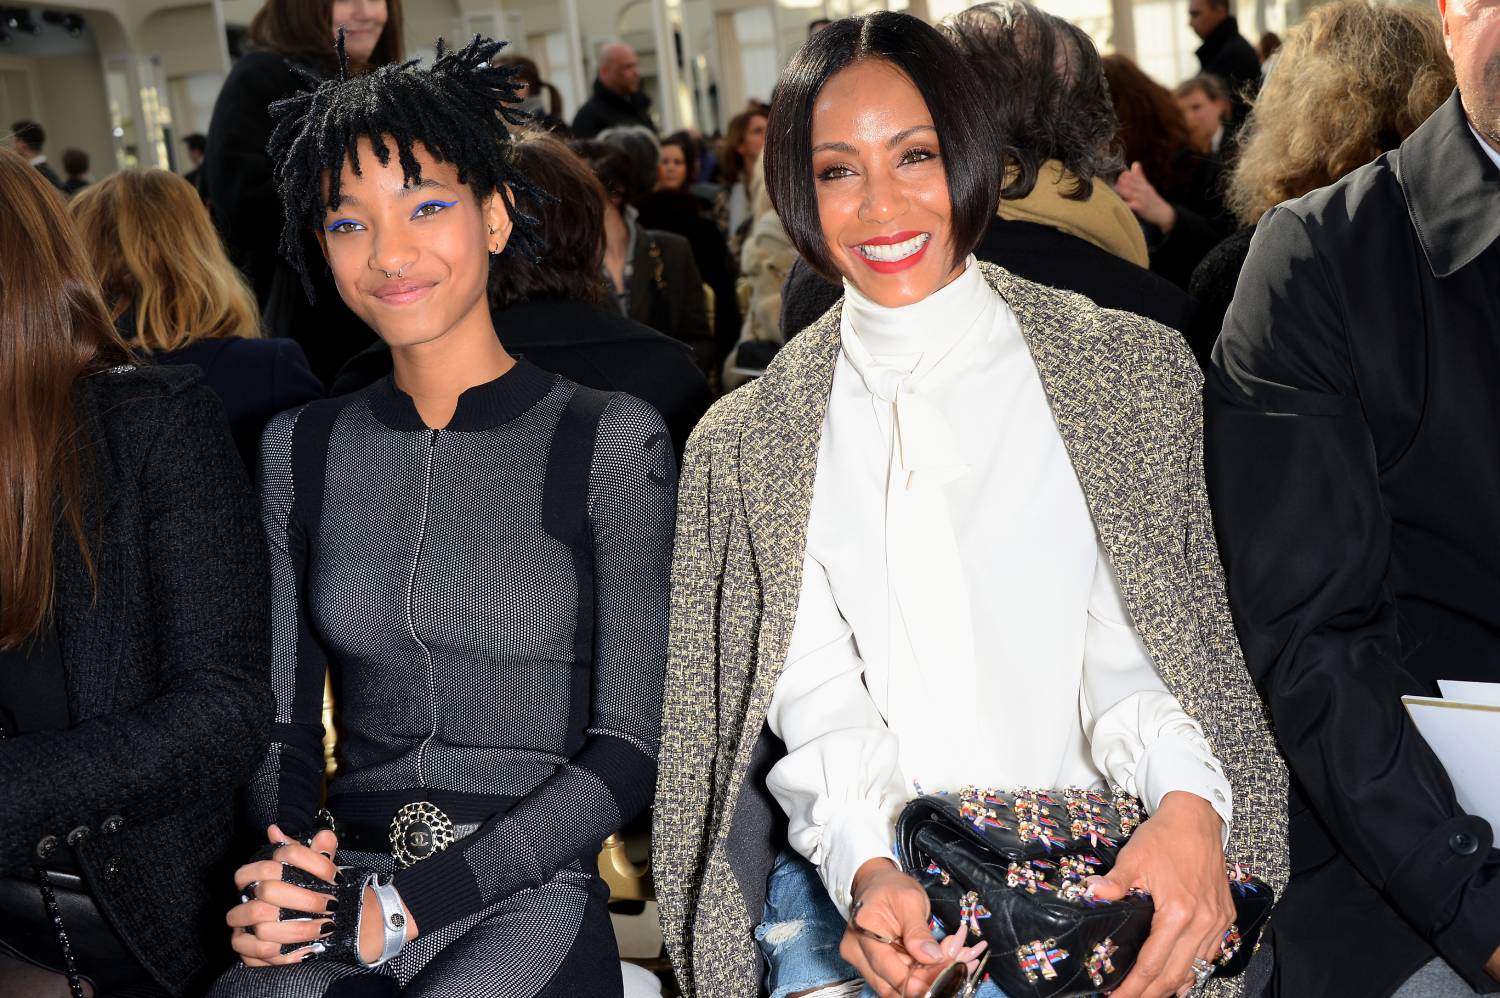 Jada Pinkett Smith and her daughter Willow Smith attend the Chanel show as part of the Paris Fashion Week Womenswear Fall/Winter 2016/2017 on March 8, 2016 in Paris, France.